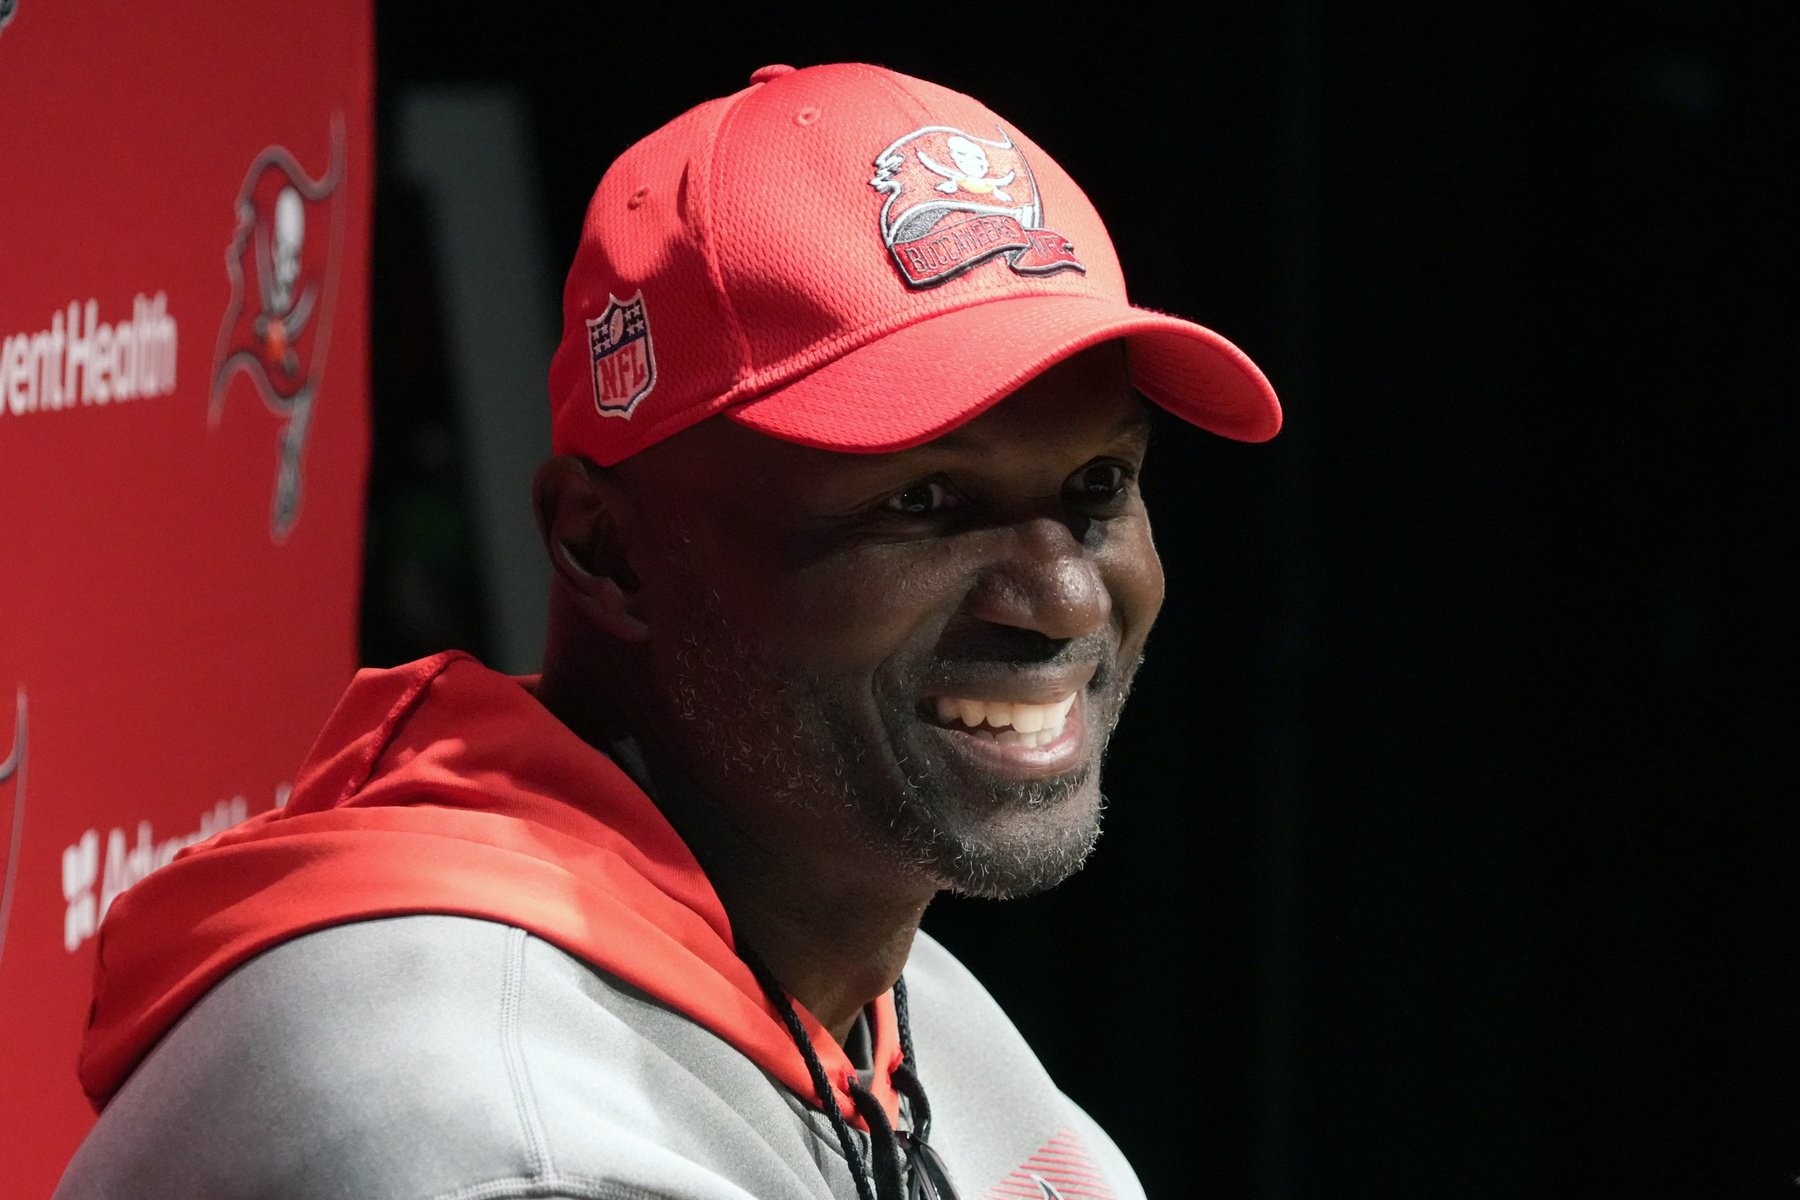 Buccaneers Head Coach Todd Bowles Earns Degree at 59 Years Old